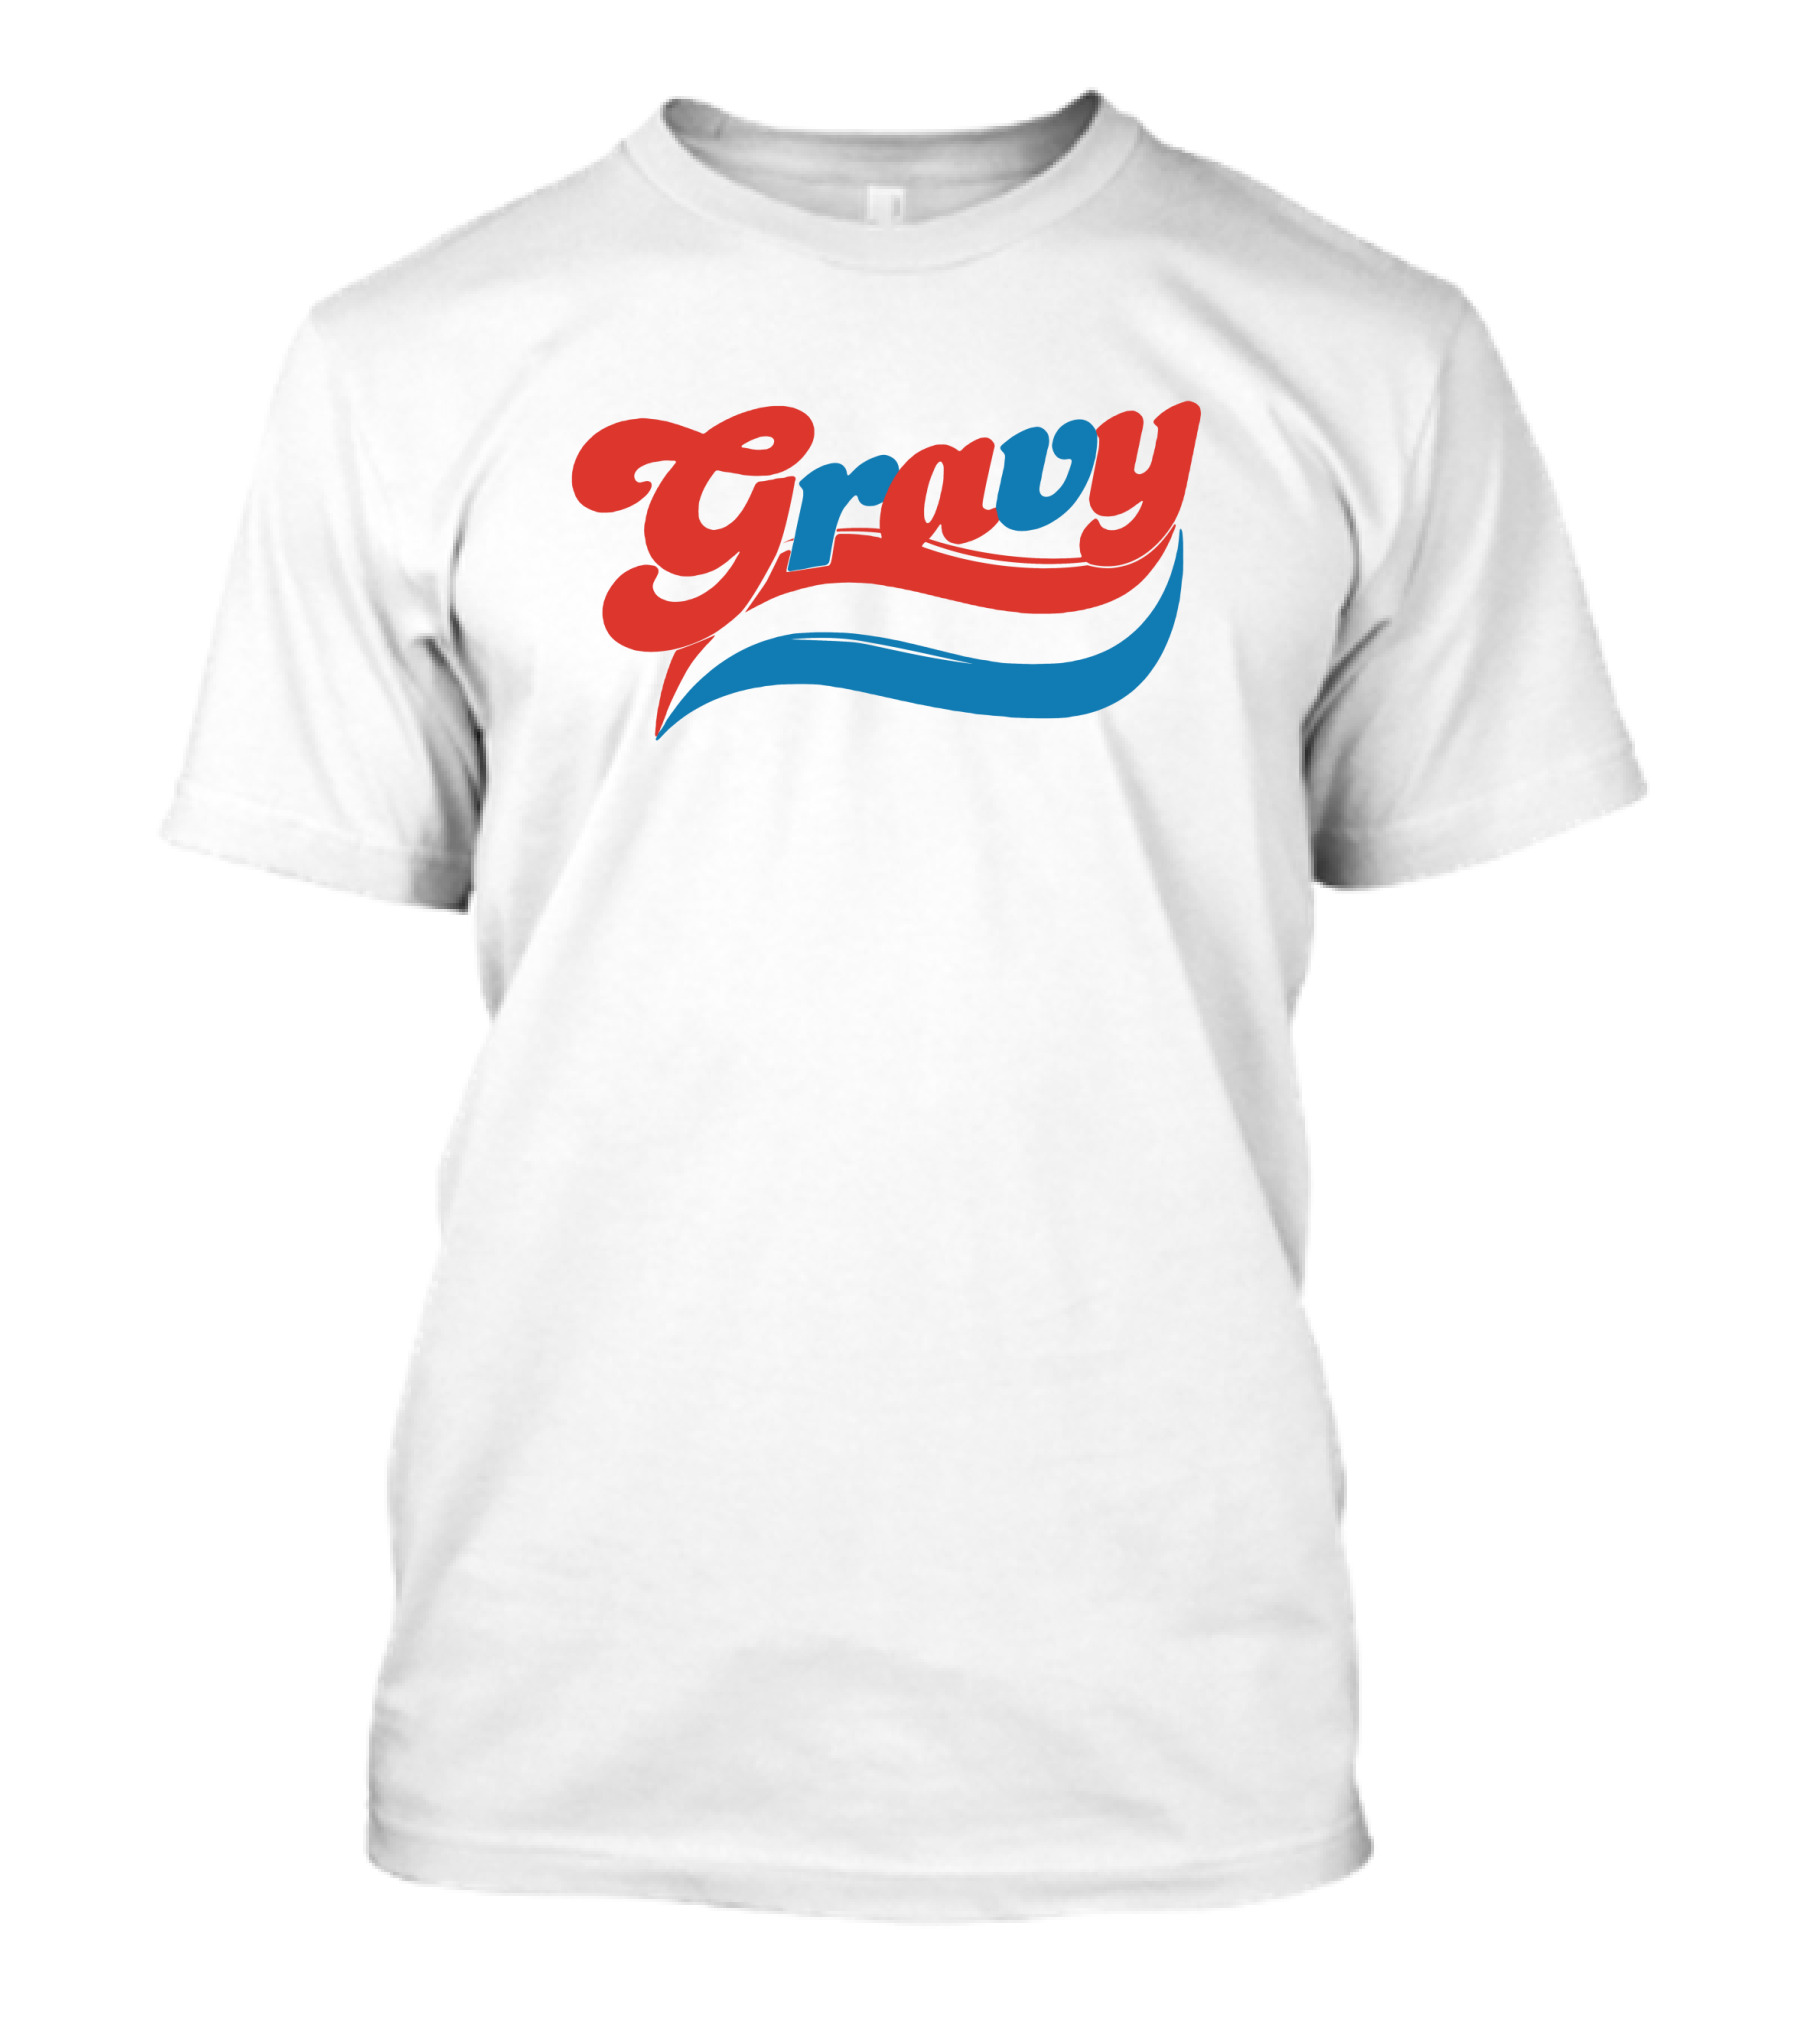 Get Saucy: Explore the Yung Gravy Merch Collection